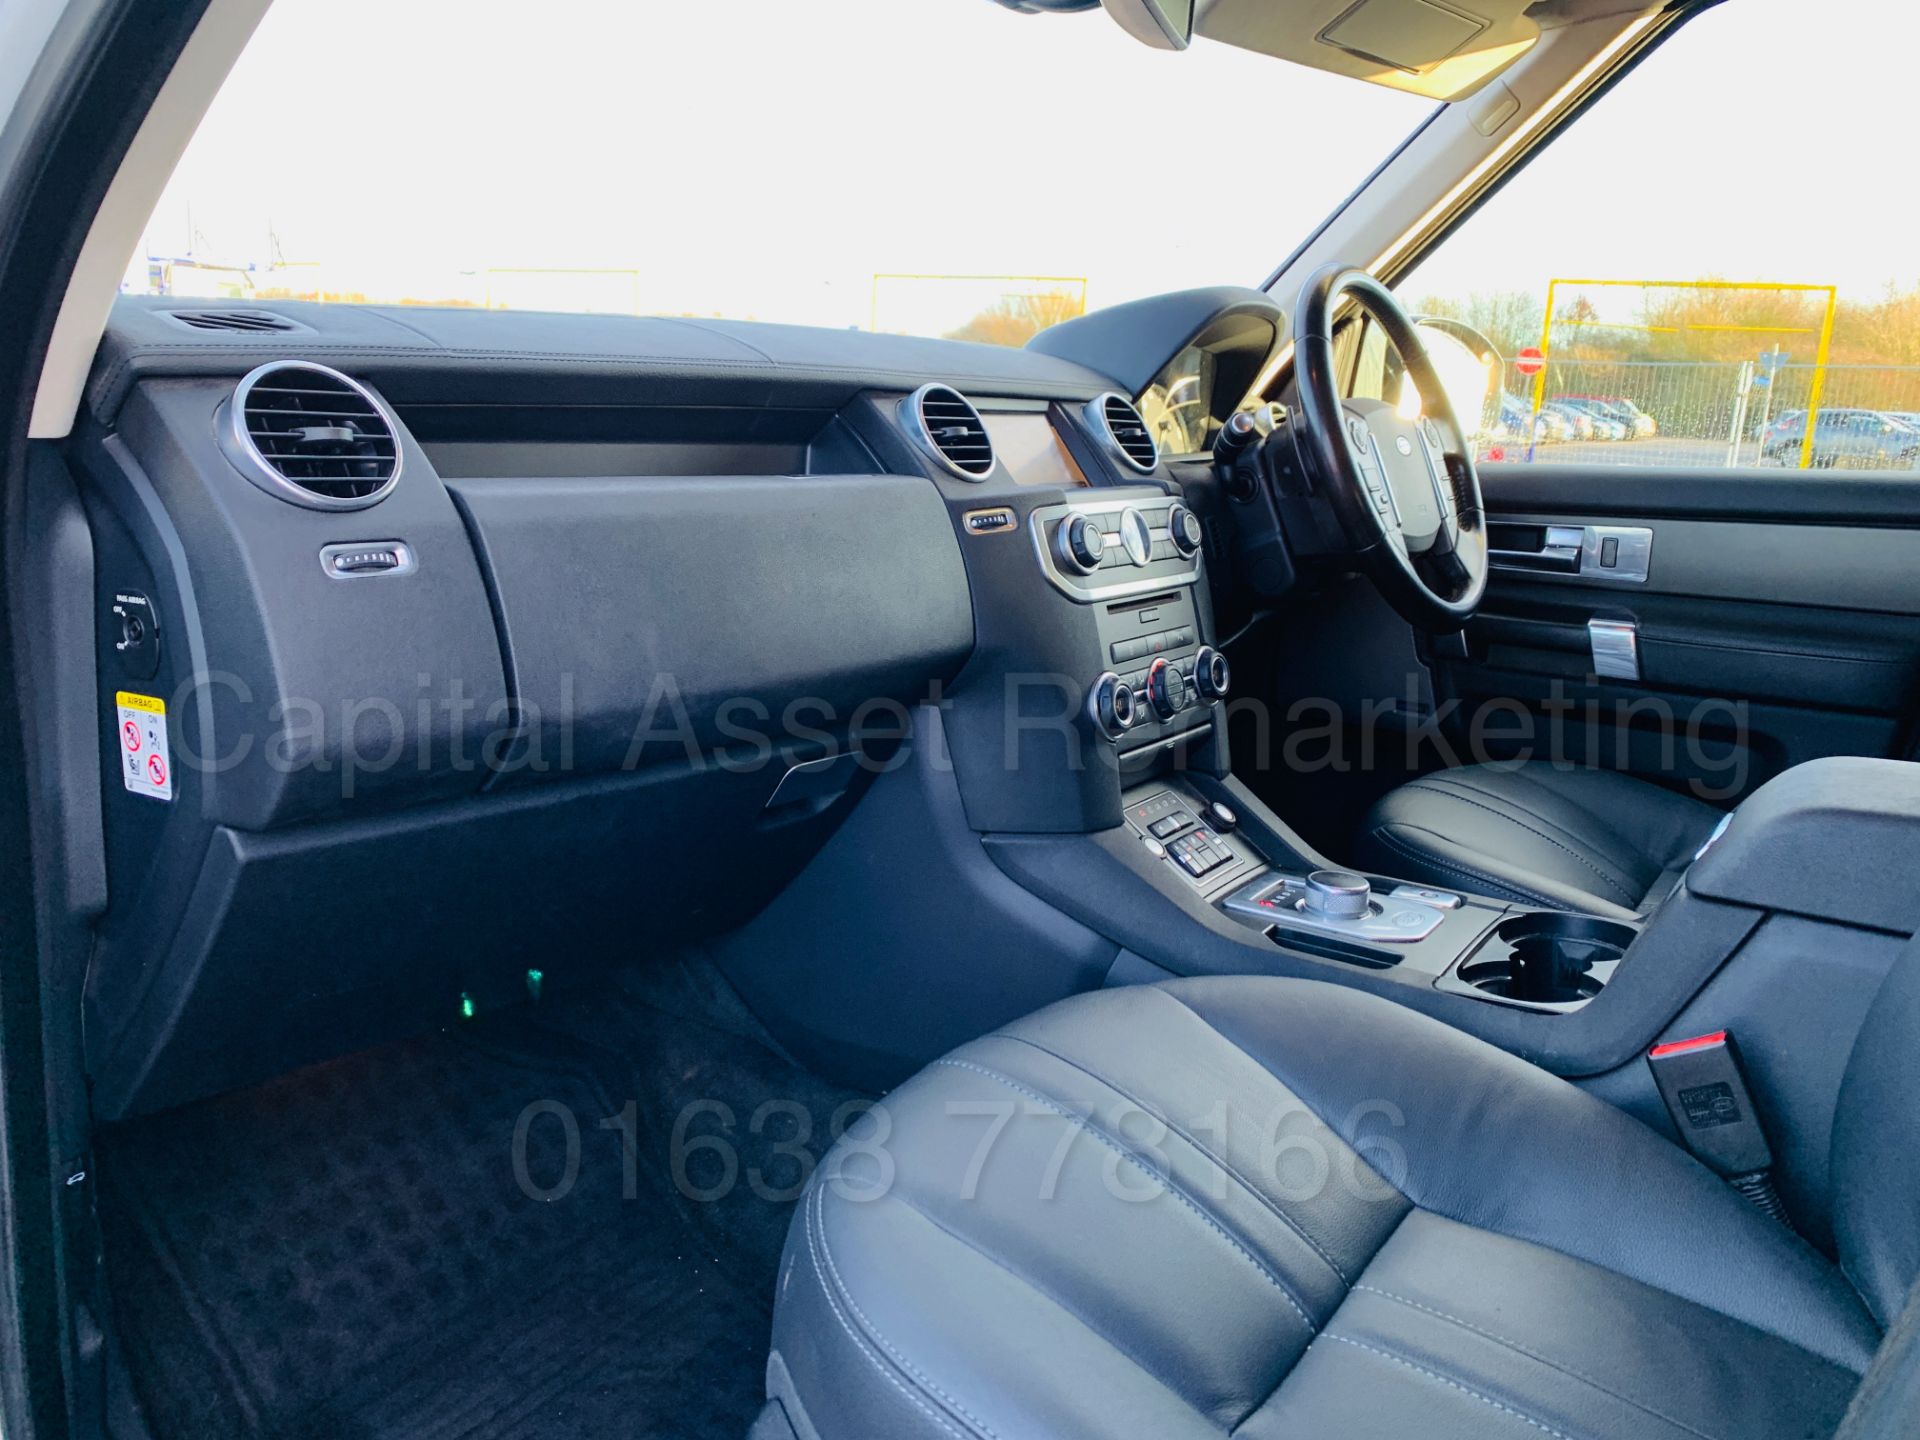 LAND ROVER DISCOVERY 4 *XS EDITION* (2015) '3.0 SDV6 - 8 SPEED AUTO' *LEATHER & SAT NAV* *HUGE SPEC* - Image 20 of 47